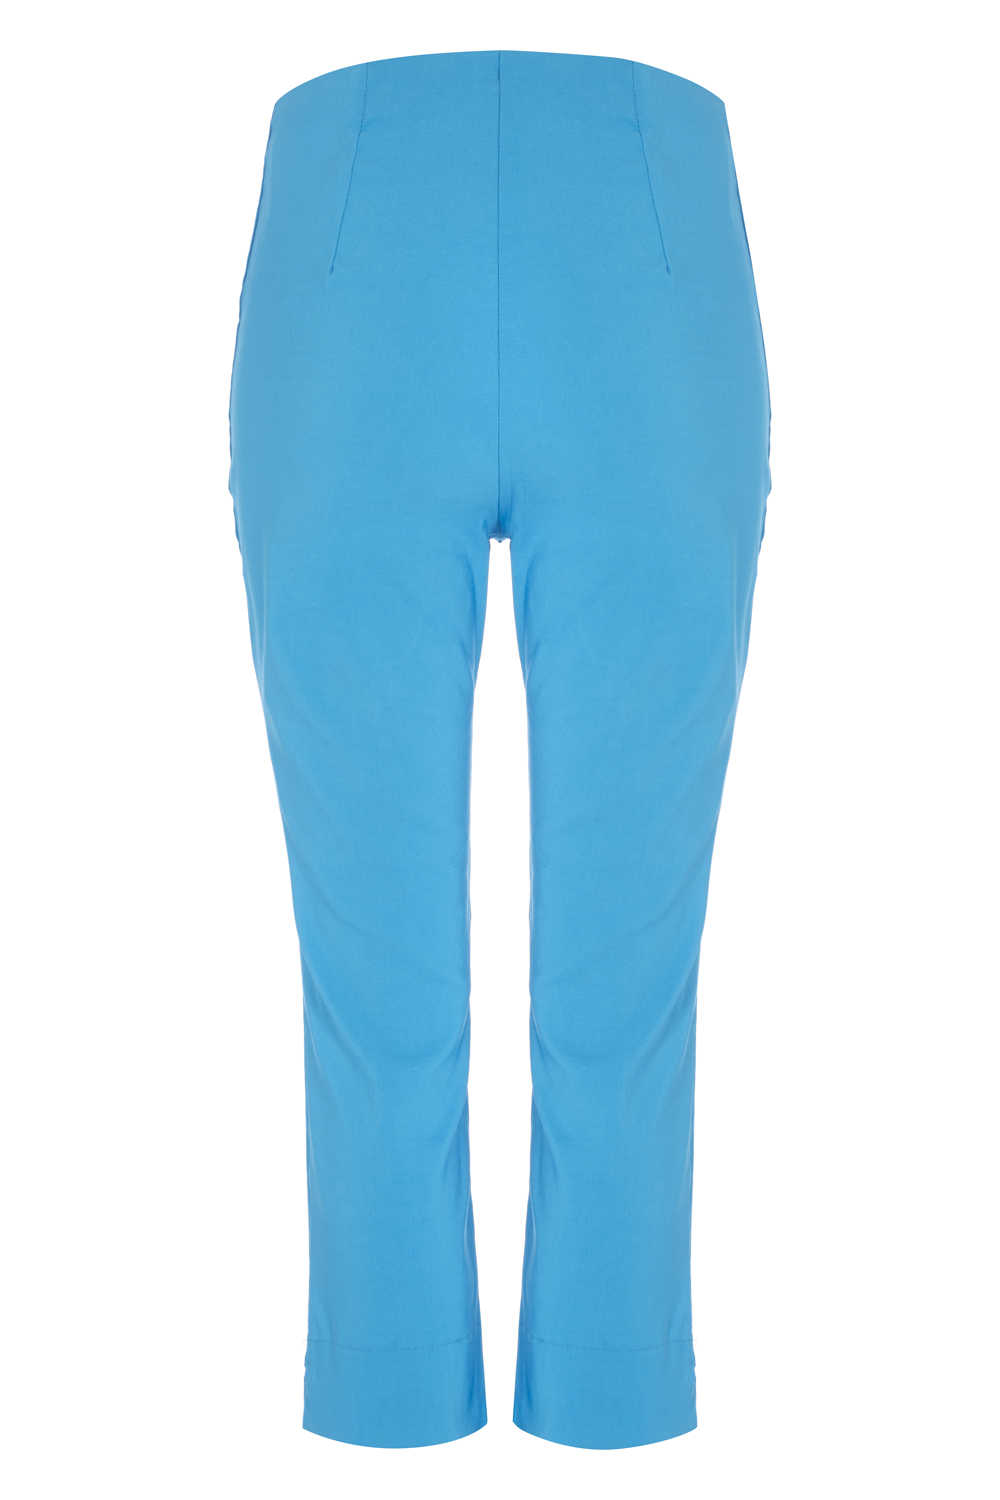 Turquoise Cropped Stretch Trousers, Image 4 of 5